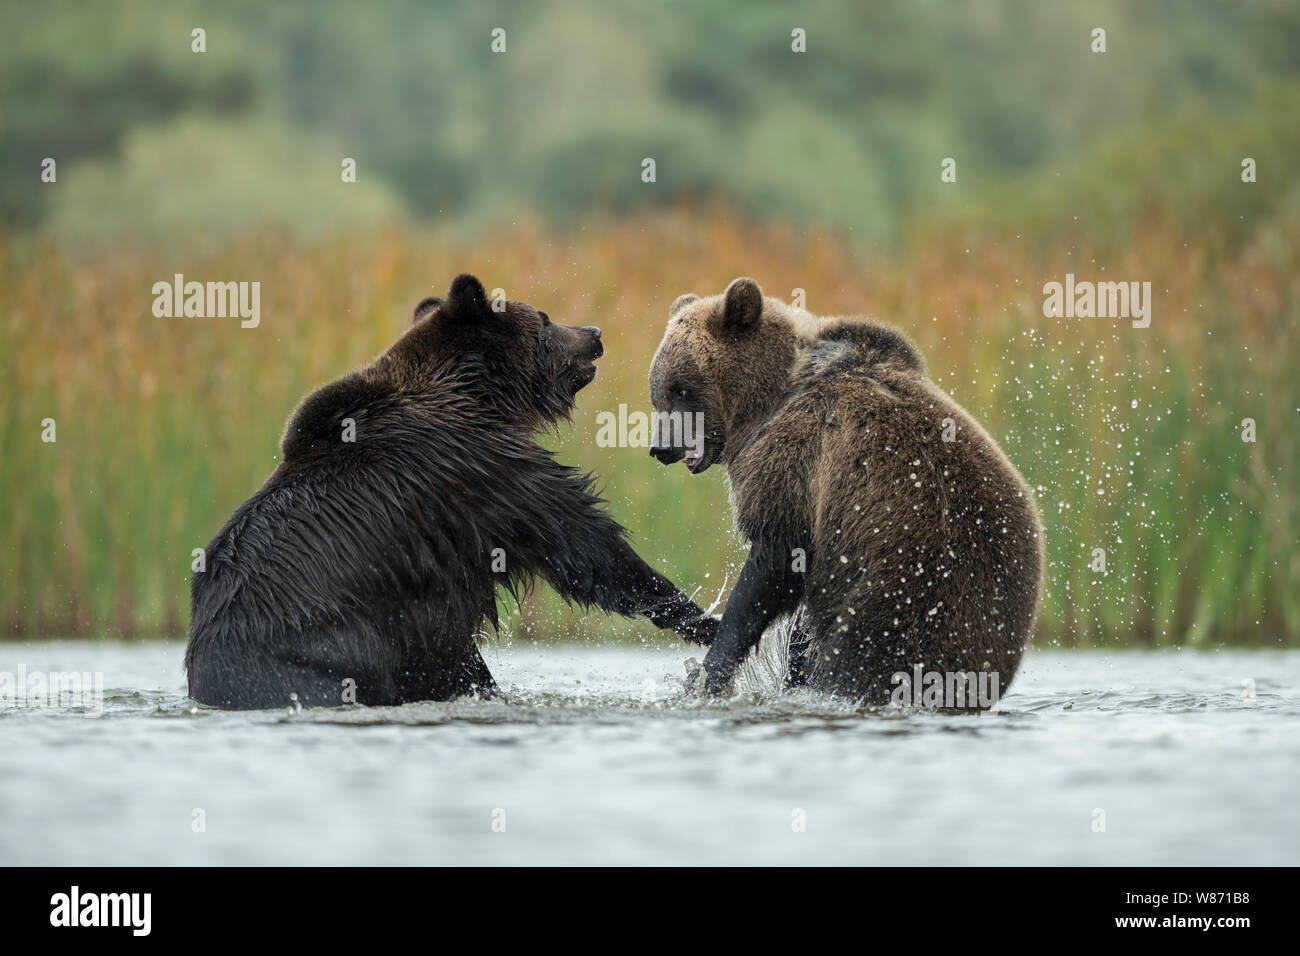 Eurasian Brown Bears ( Ursus arctos ) fighting, struggling, in fight, standing on hind legs in the shallow water of a lake, Europe. Stock Photo